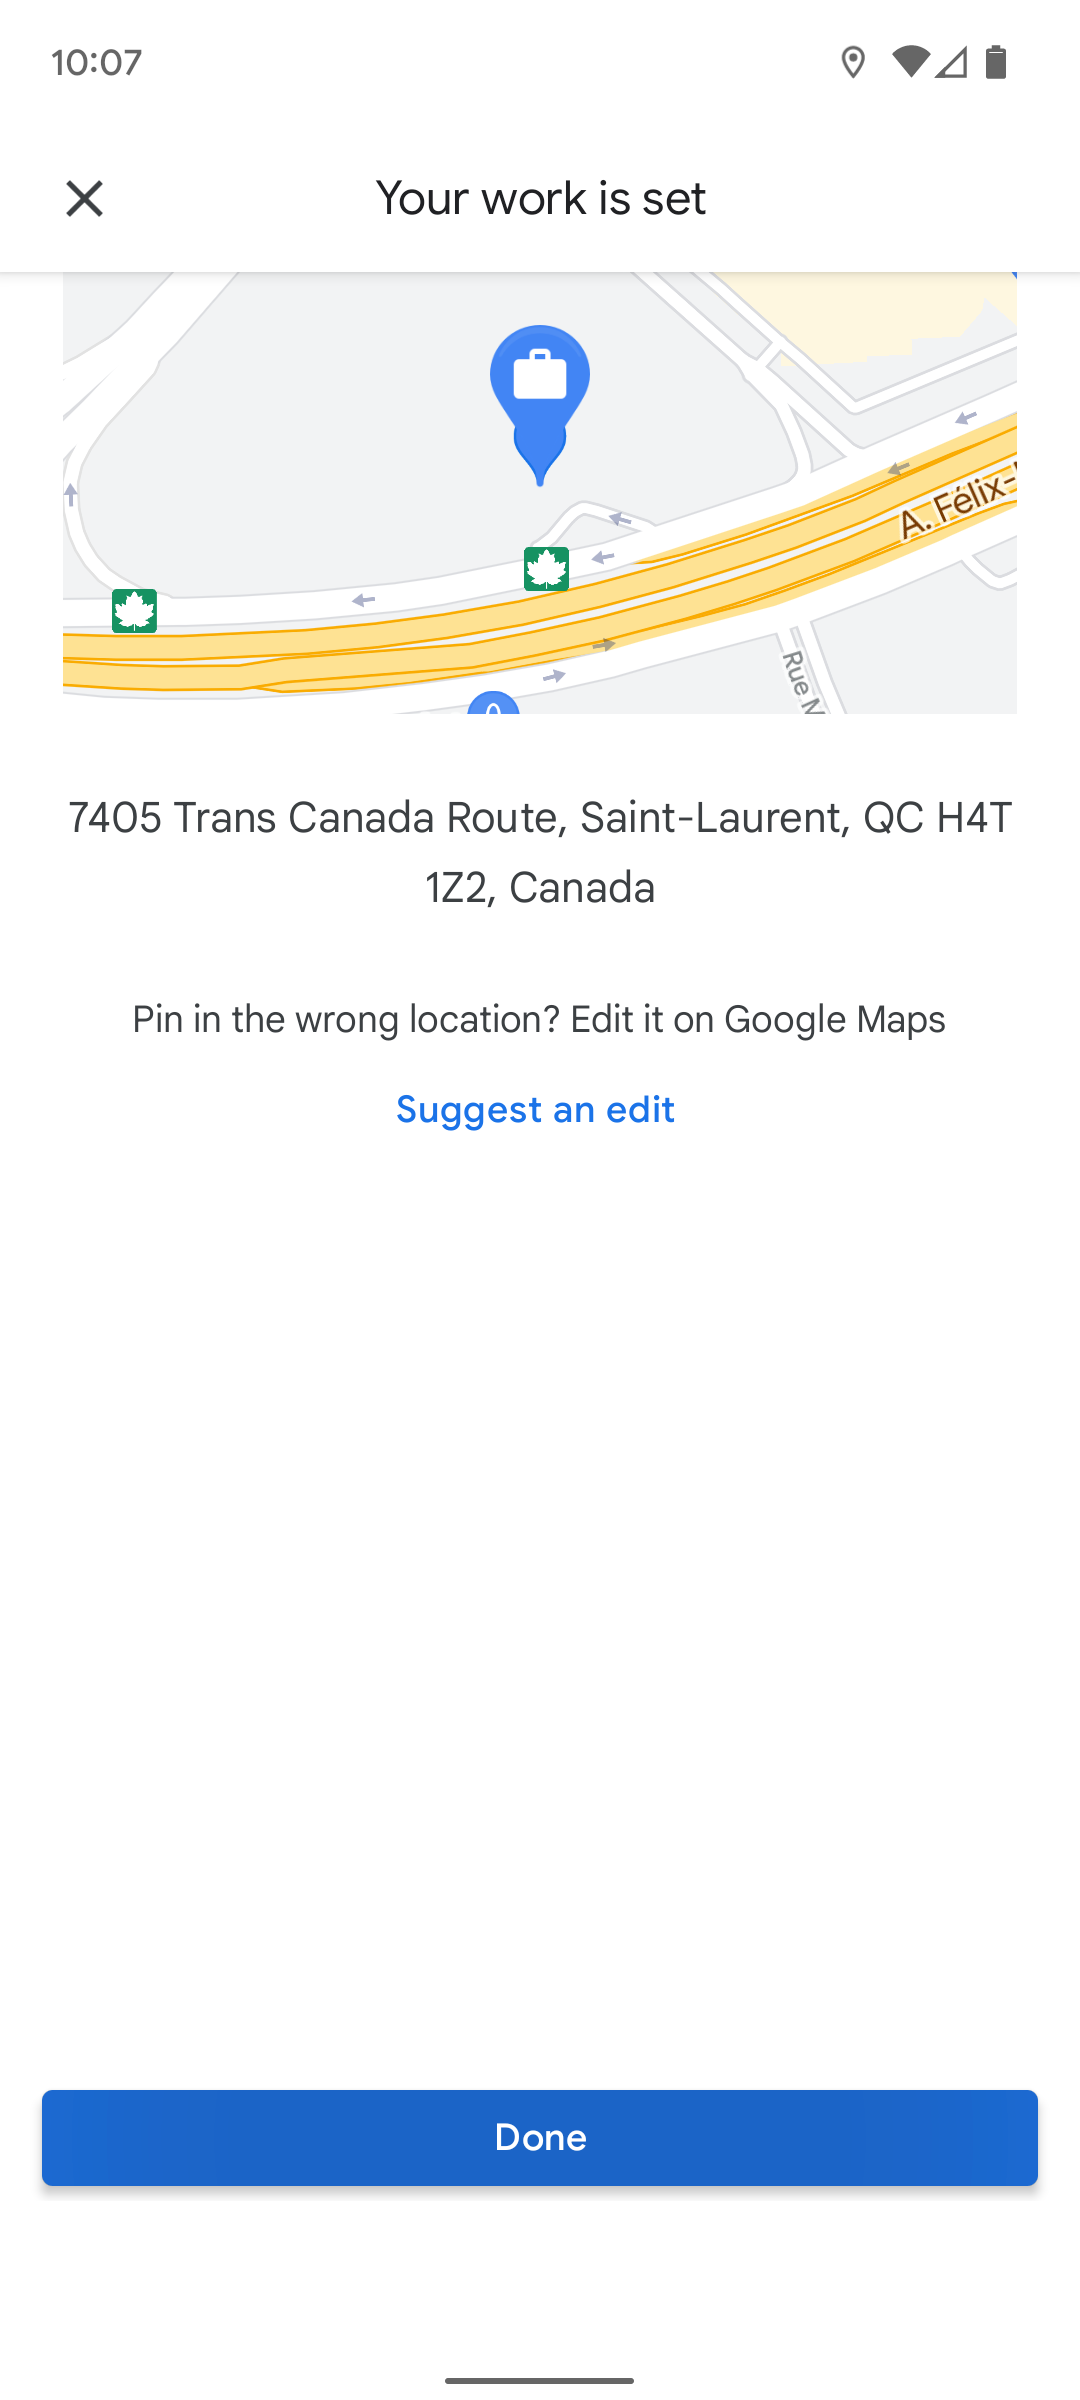 Google Maps mobile app asking to confirm the work address.